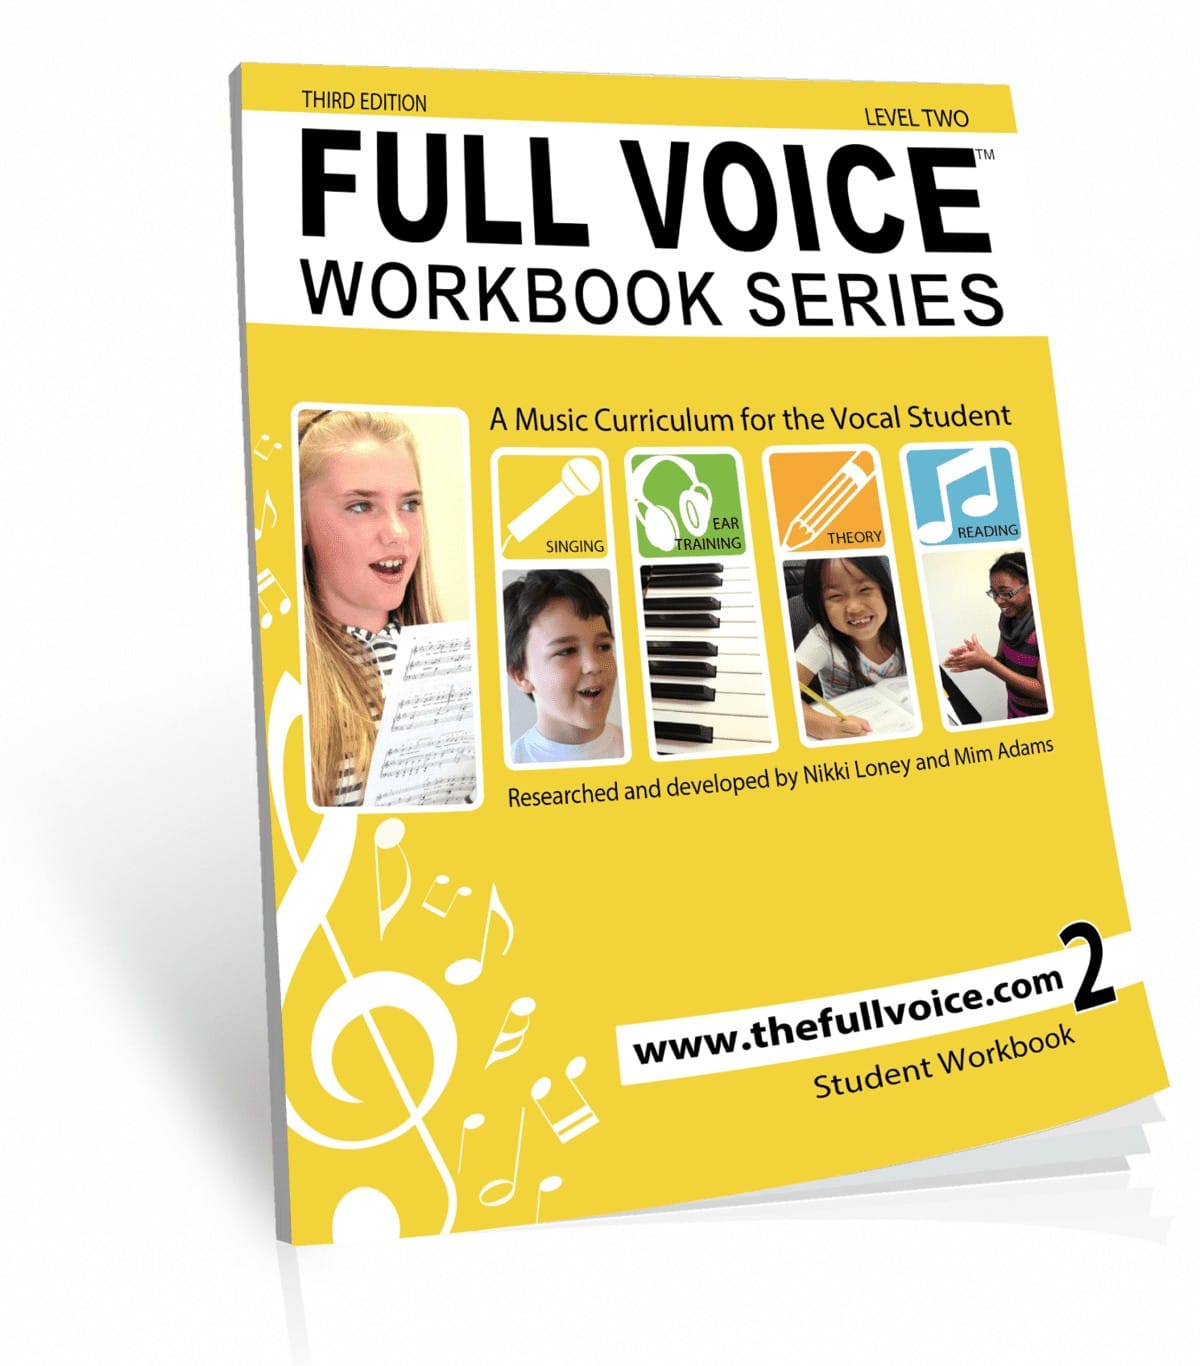 FULL VOICE Student Workbook – Level Two